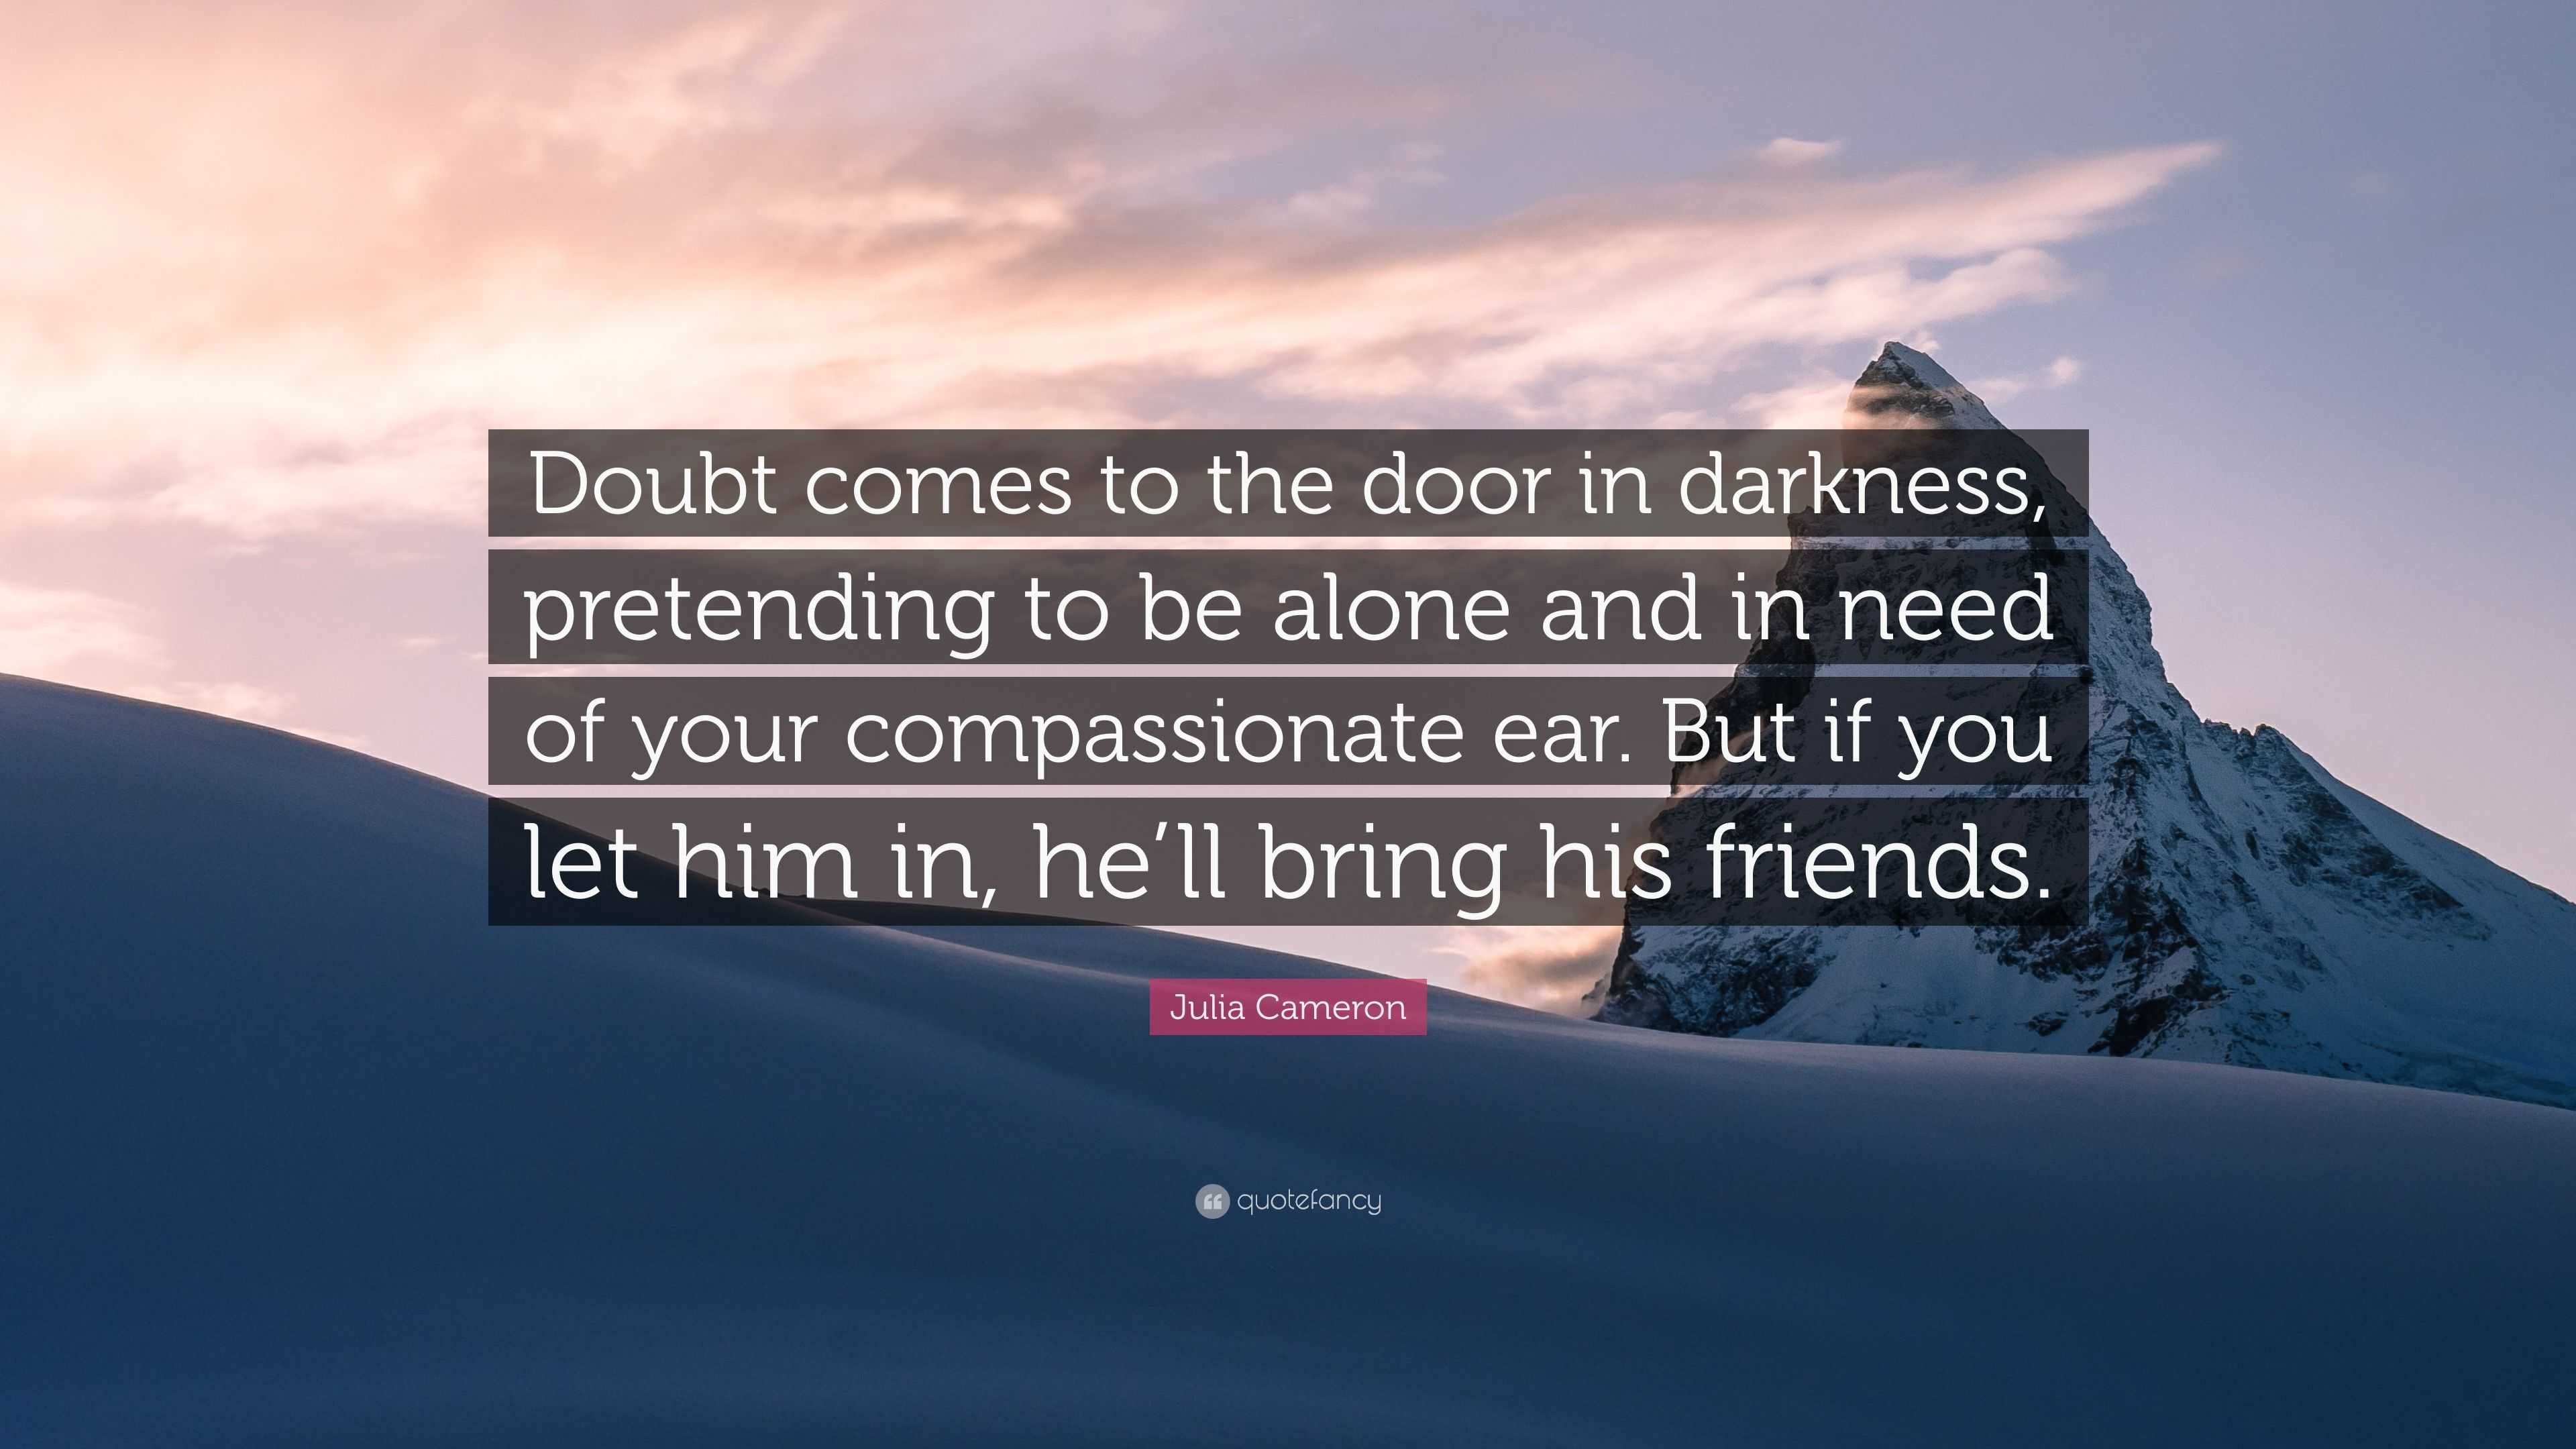 Julia Cameron Quote: “Doubt comes to the door in darkness, pretending to be  alone and in need of your compassionate ear. But if you let him in”